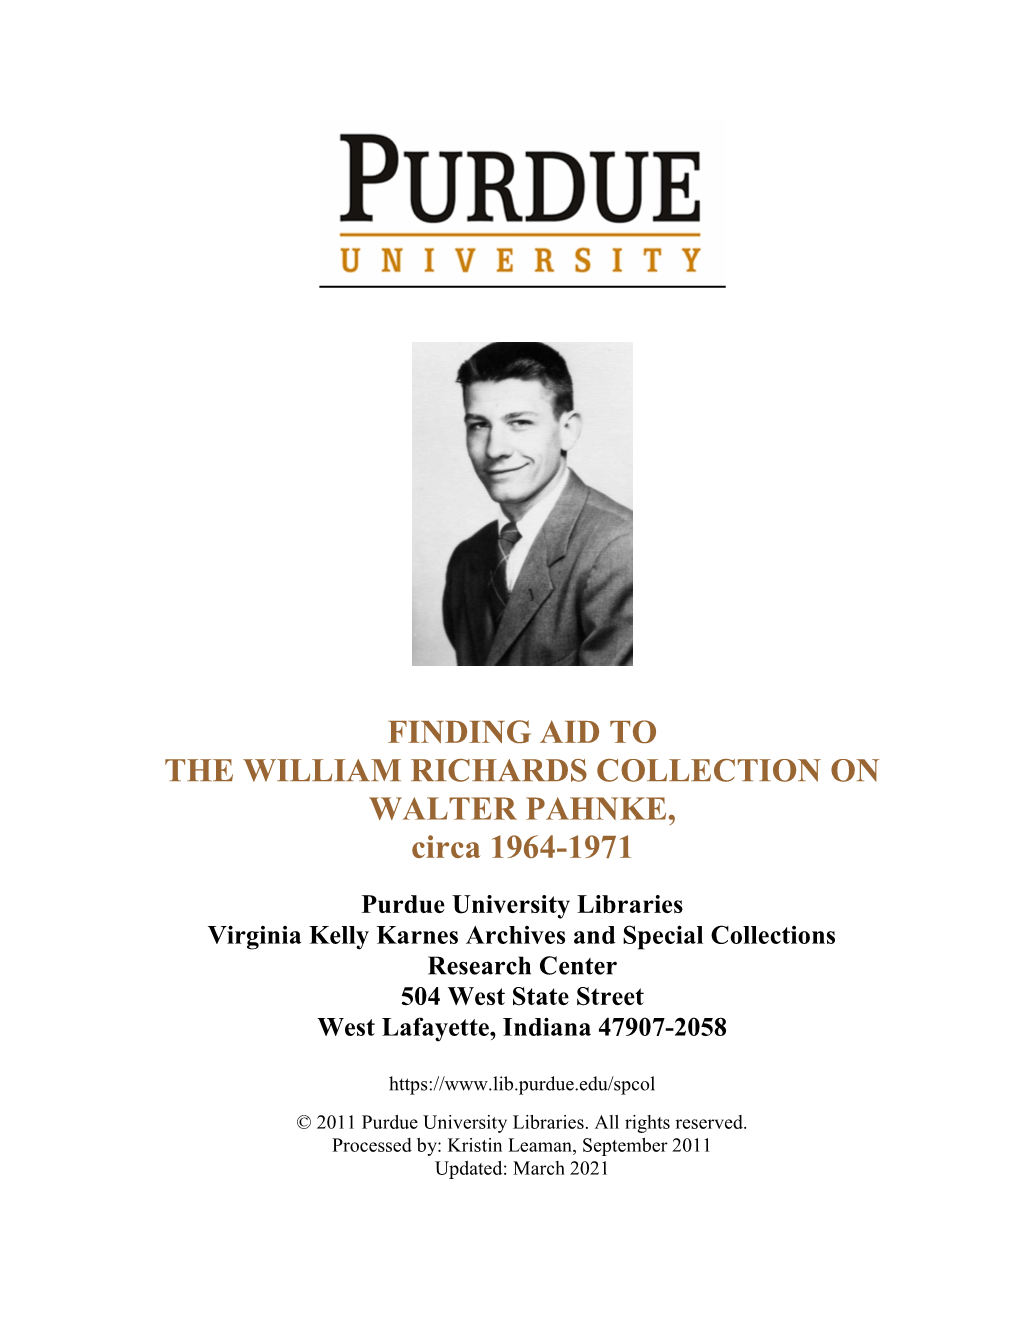 FINDING AID to the WILLIAM RICHARDS COLLECTION on WALTER PAHNKE, Circa 1964-1971